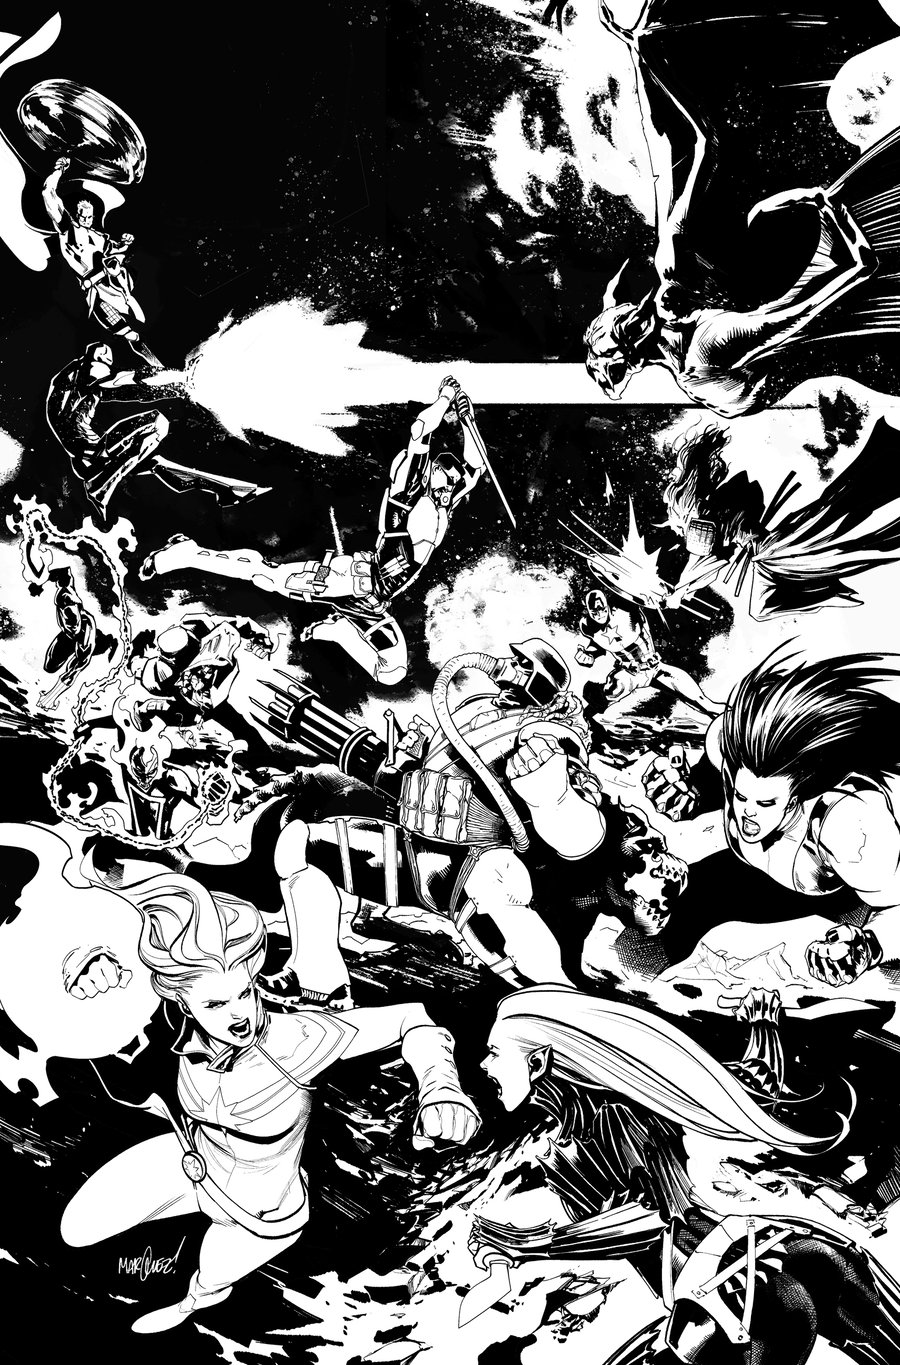 Image of AVENGERS #17 COVER ARTIST'S PROOF